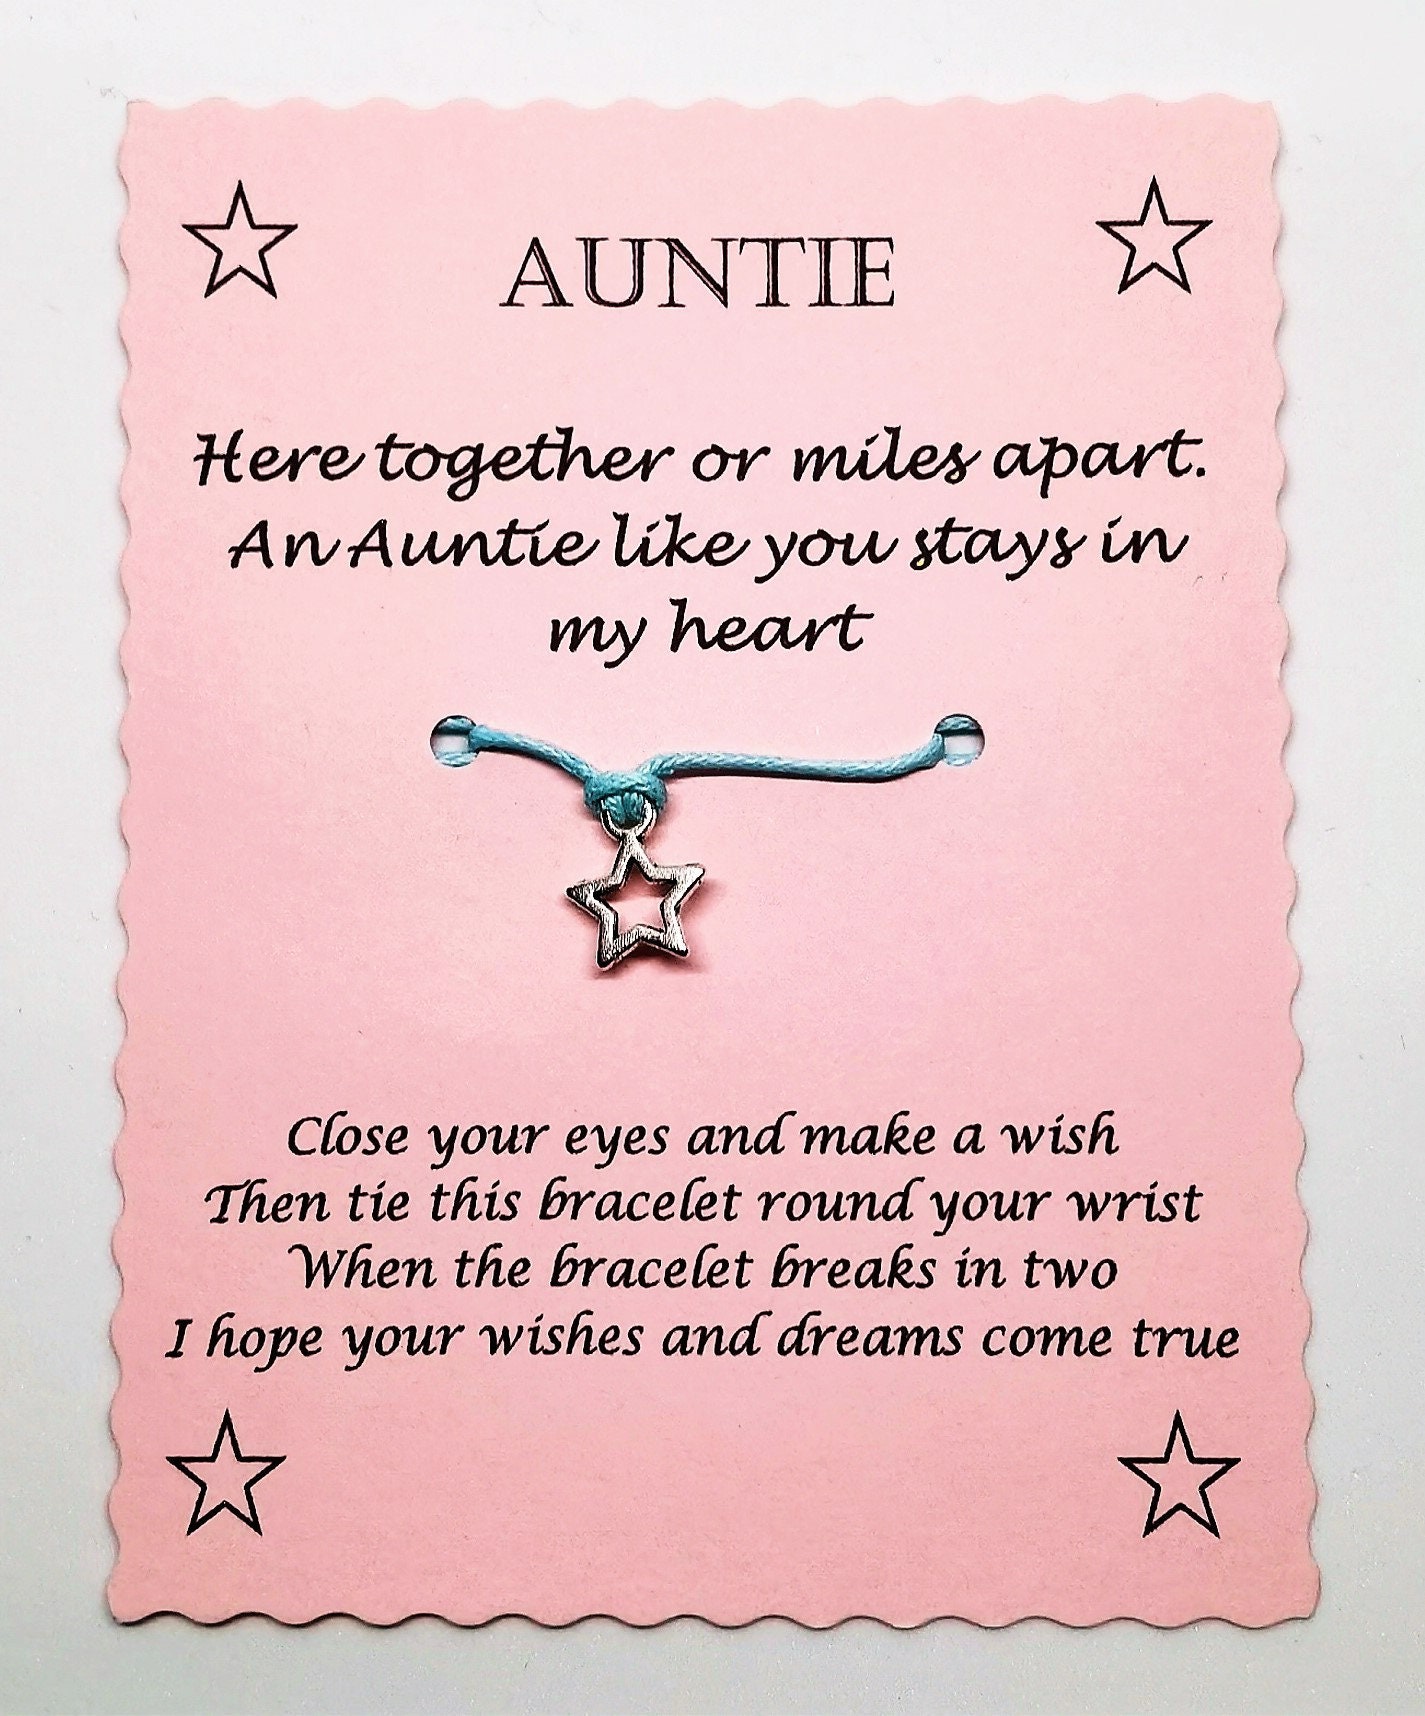 Appreciation Aunty Stainless Steel Bracelet Gifts, To My Aunty Birthday  Christmas Wedding Keepsake Gifts for Aunty With you by my side, I know that  I am capable of doing anything. I love